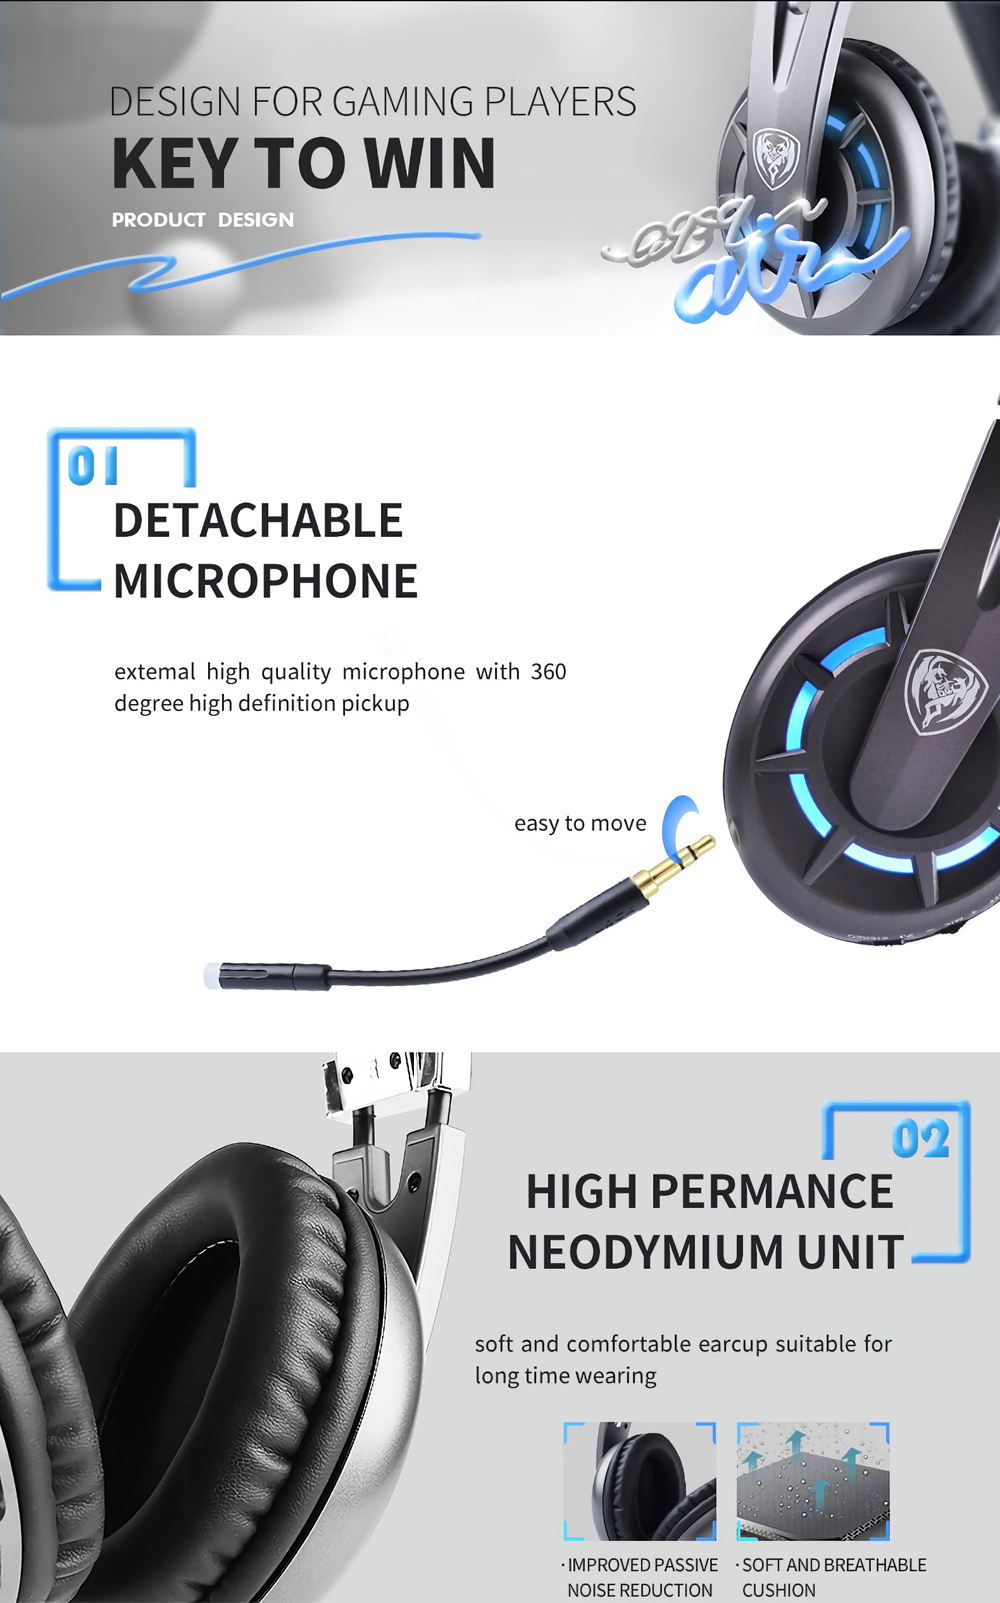 SOMiC G939AIR 2.4GHz Wireless 7.1 Channel Surround Sound Stereo Gaming Headphone Headset with Mic 12